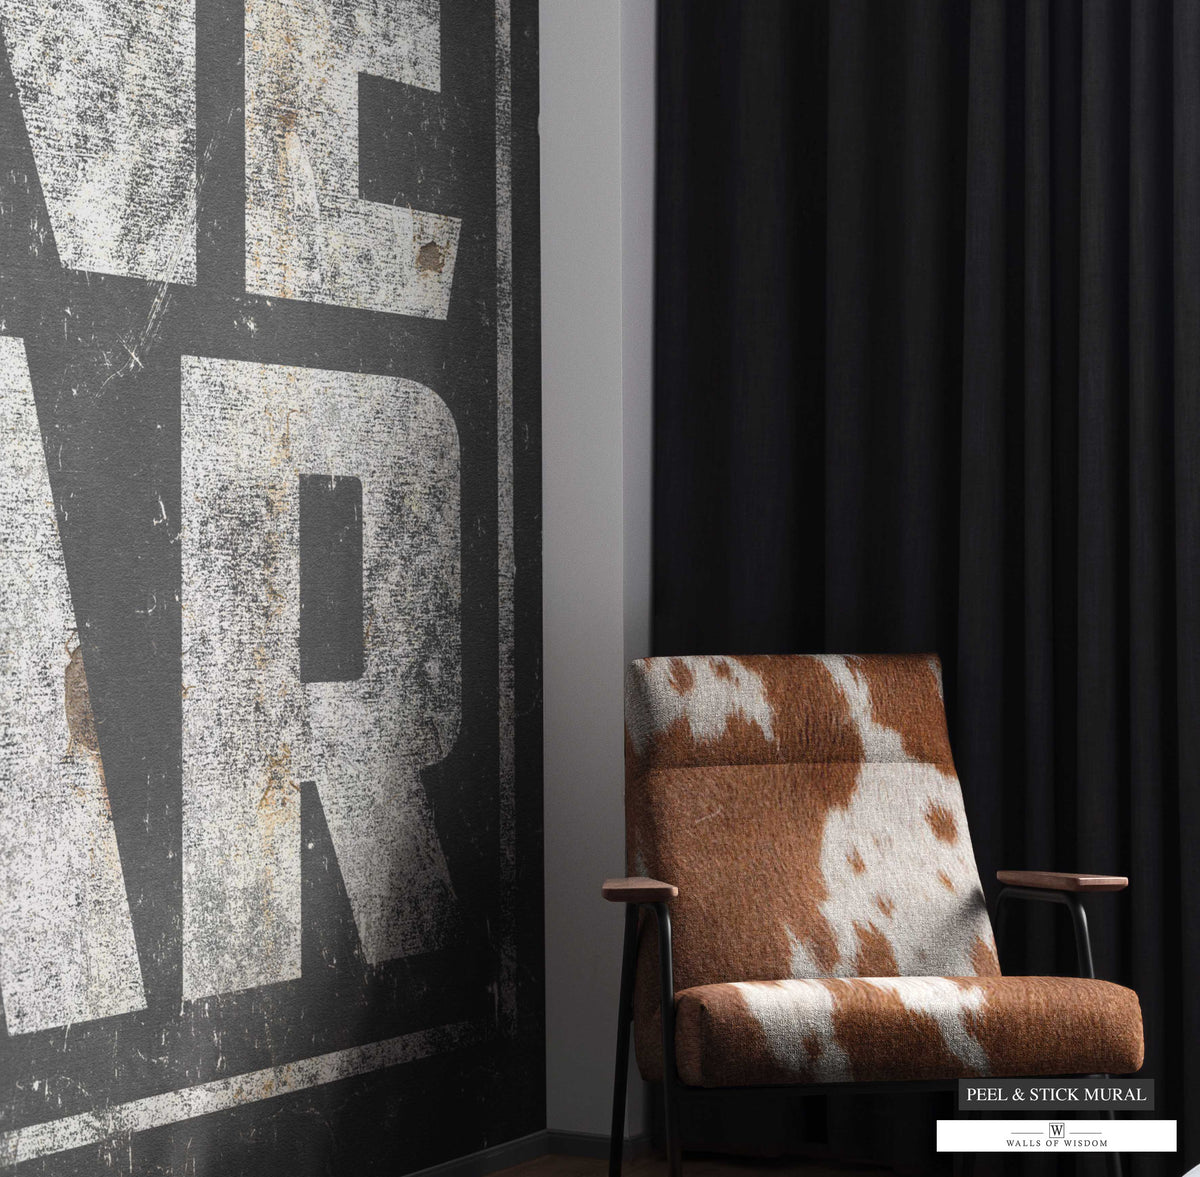 Iconic Texas Lone Star Sign Turned Wallpaper for Statement Home Decor.